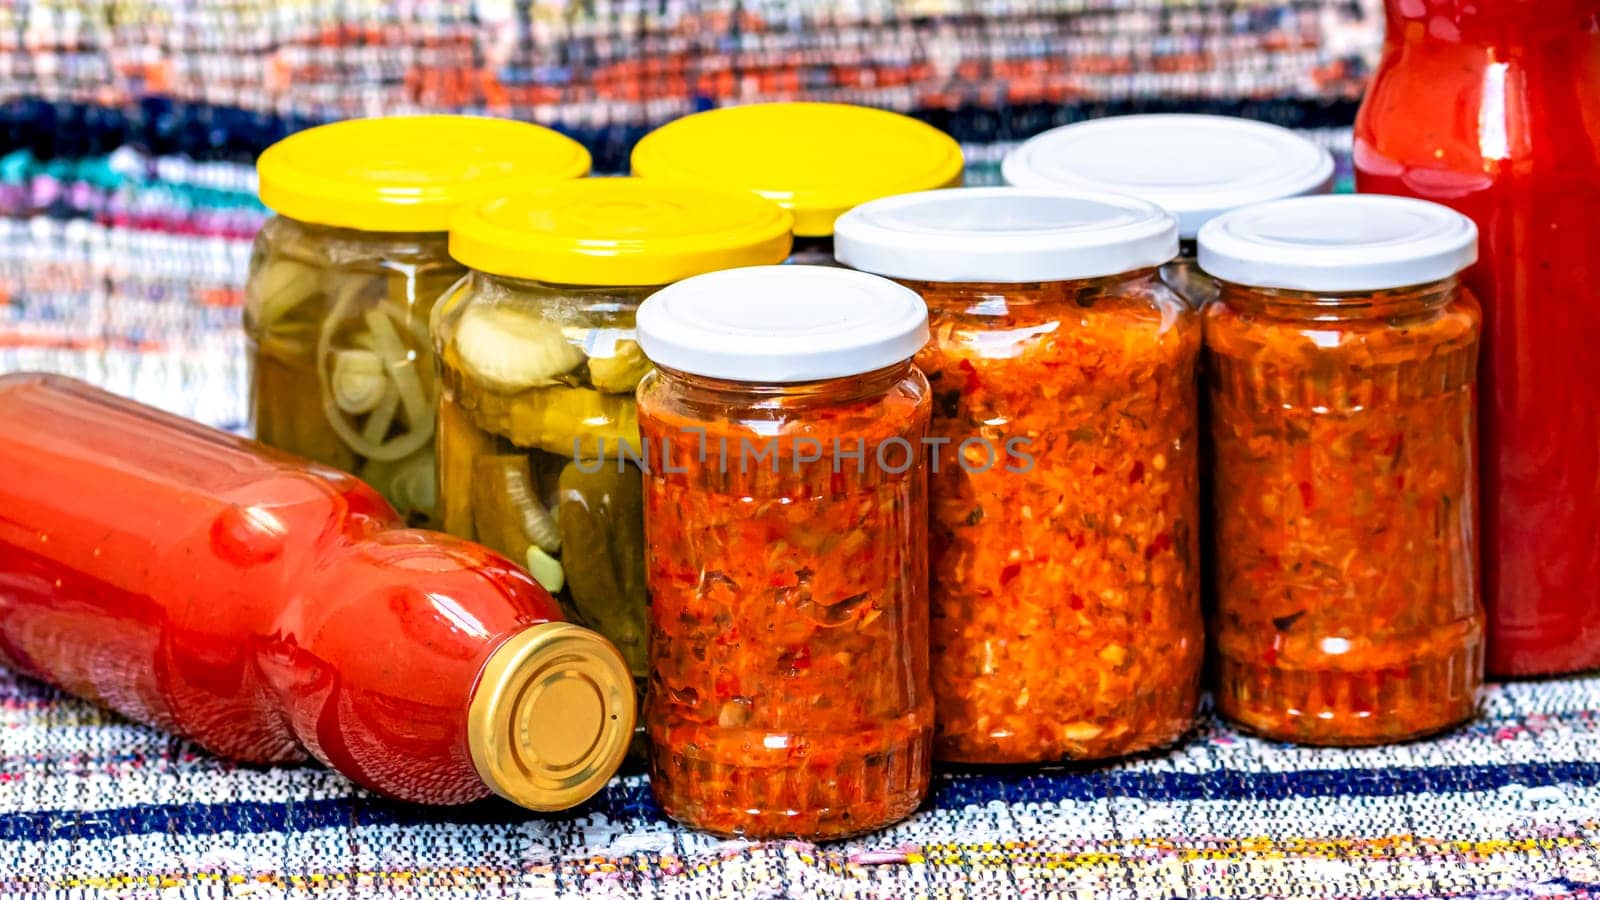 Glass jars with pickled red bell peppers and pickled cucumbers (pickles) isolated. Jars with variety of pickled vegetables, jars with zacusca and bottles with tomatoes sauce. Preserved food concept. by vladispas